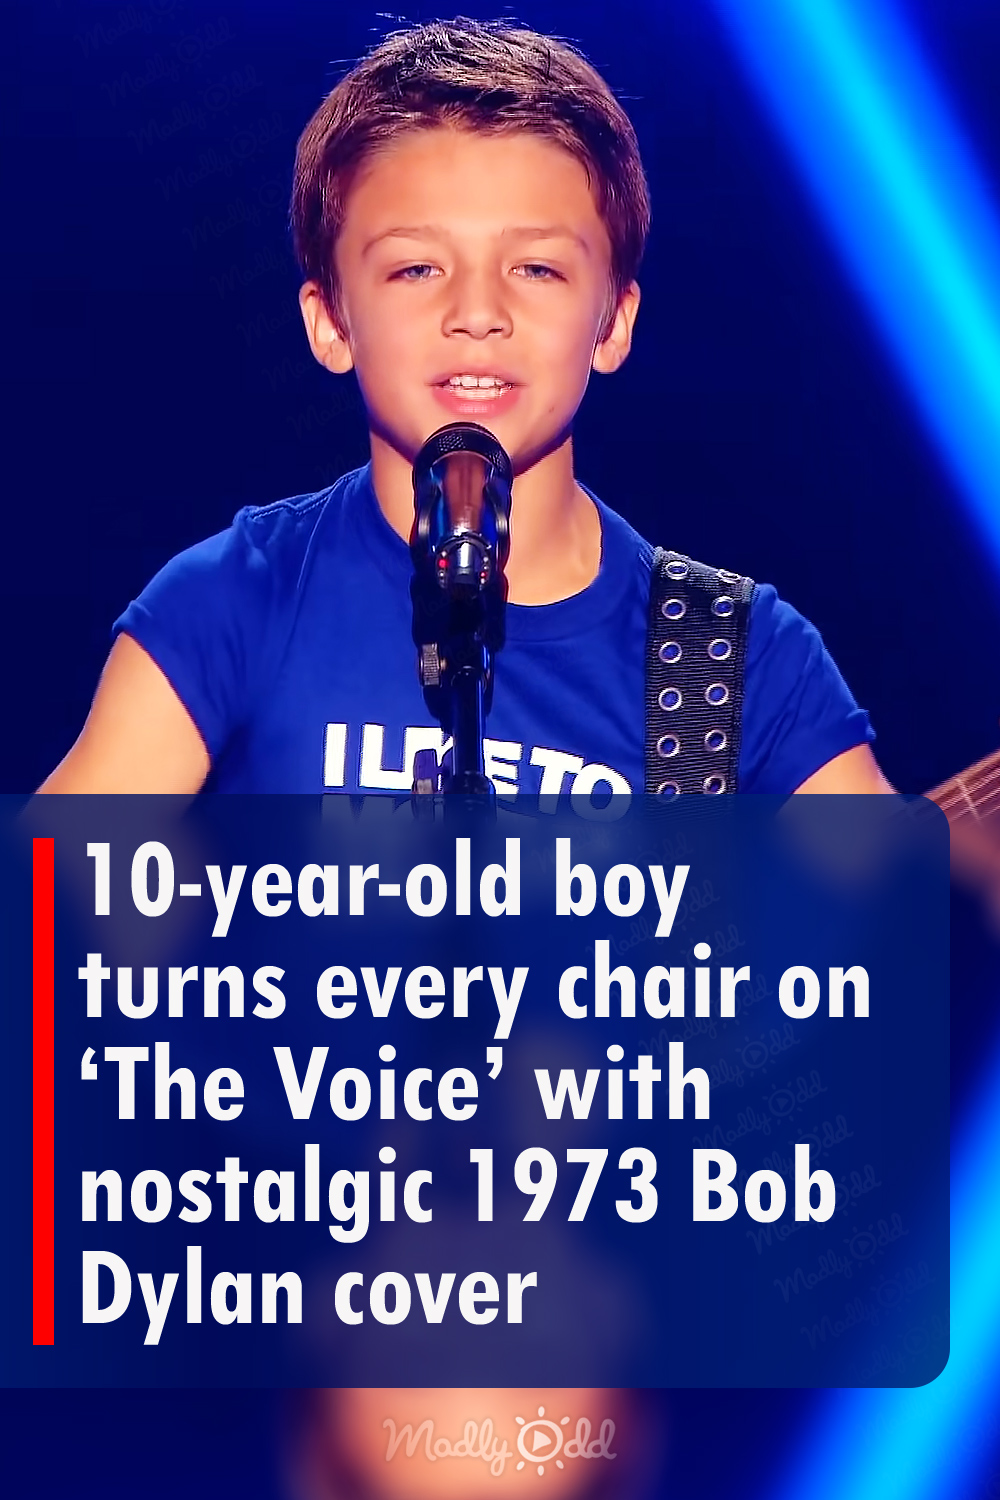 10-year-old boy turns every chair on \'The Voice\' with nostalgic 1973 Bob Dylan cover